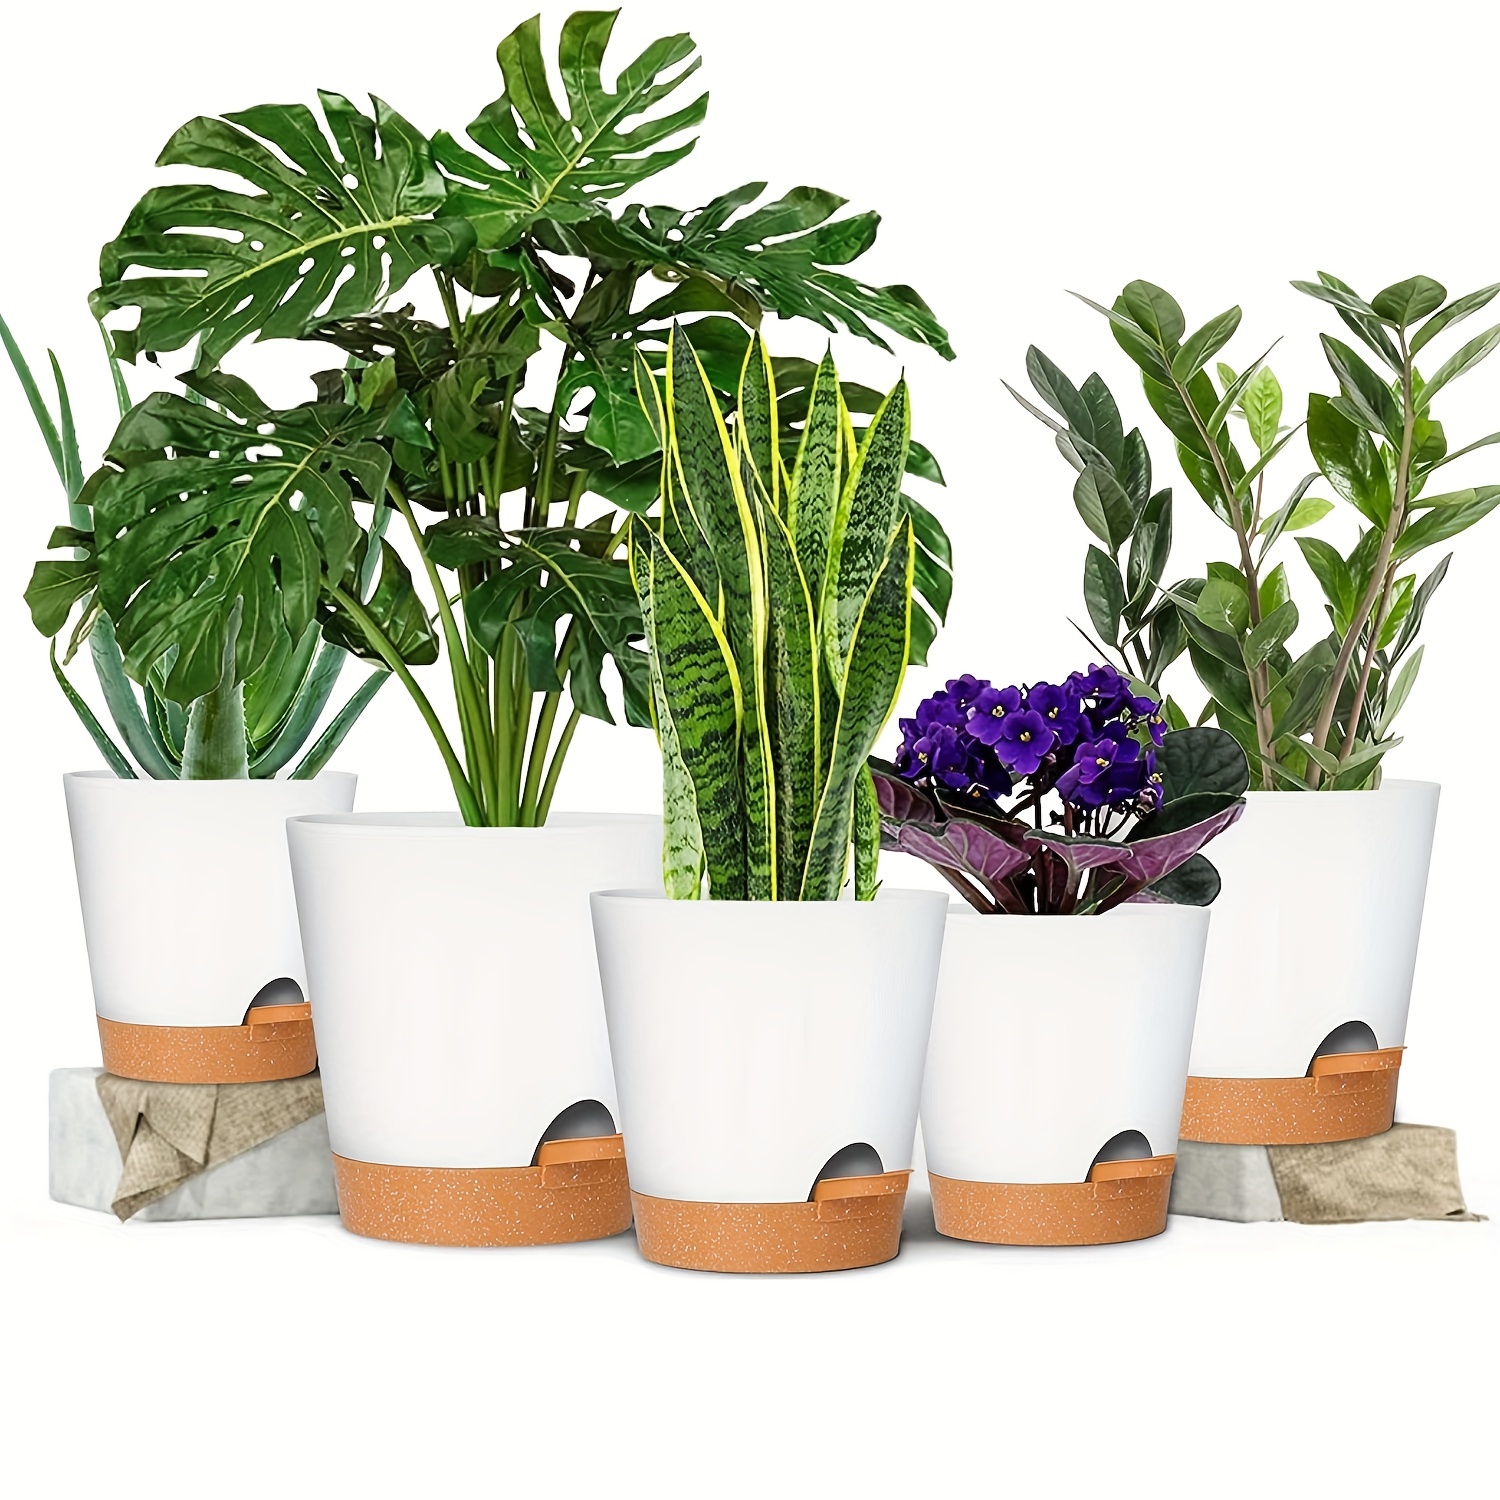 How to choose pots for indoor plants this year